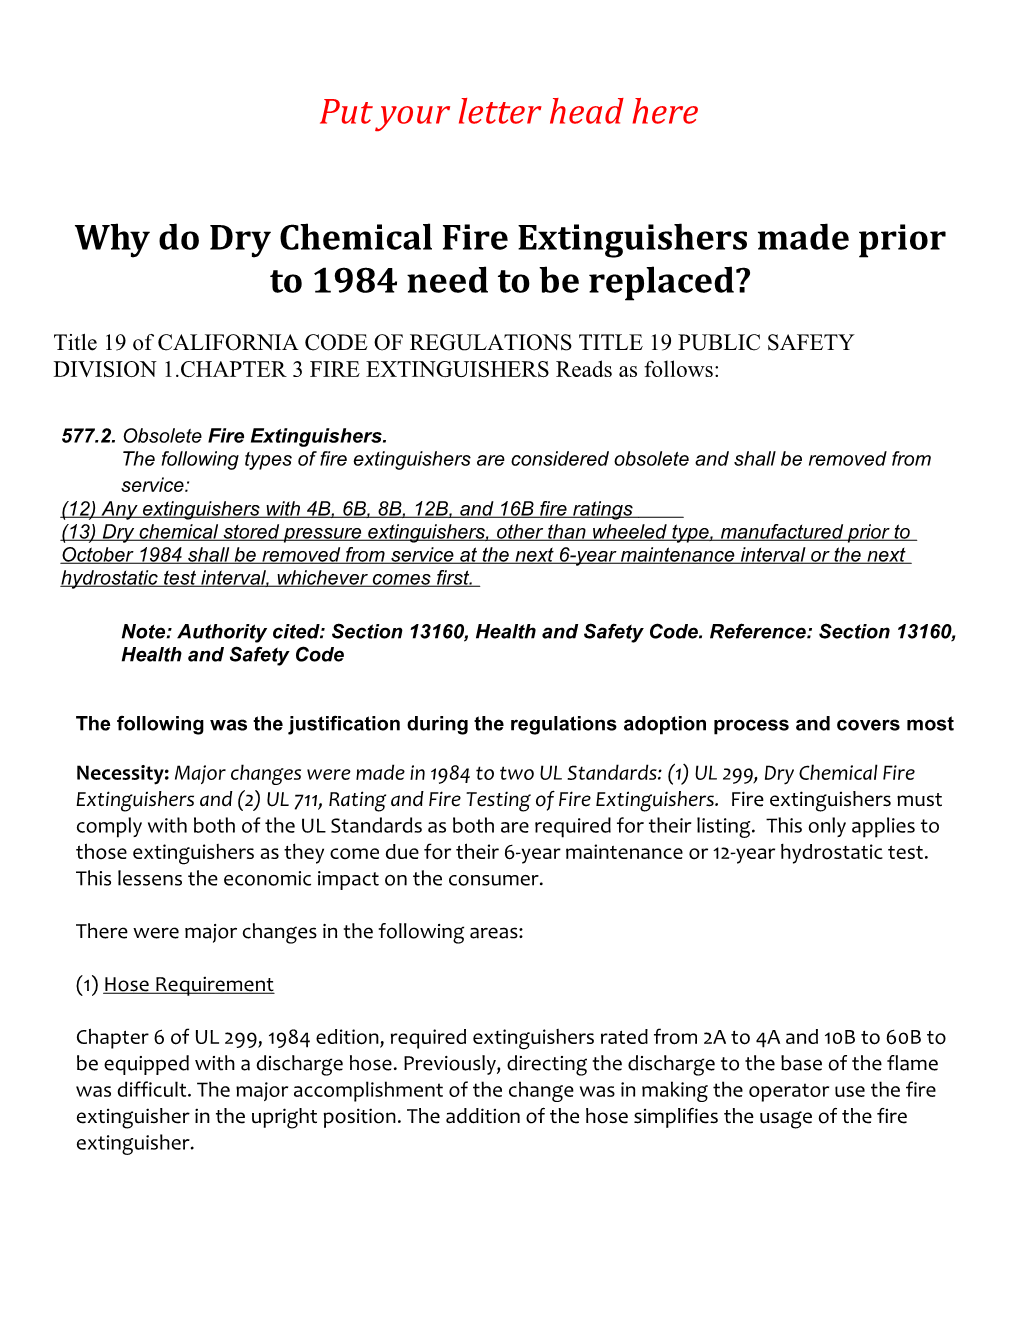 Why Do Dry Chemical Fire Extinguishers Made Prior to 1984 Need to Be Replaced?